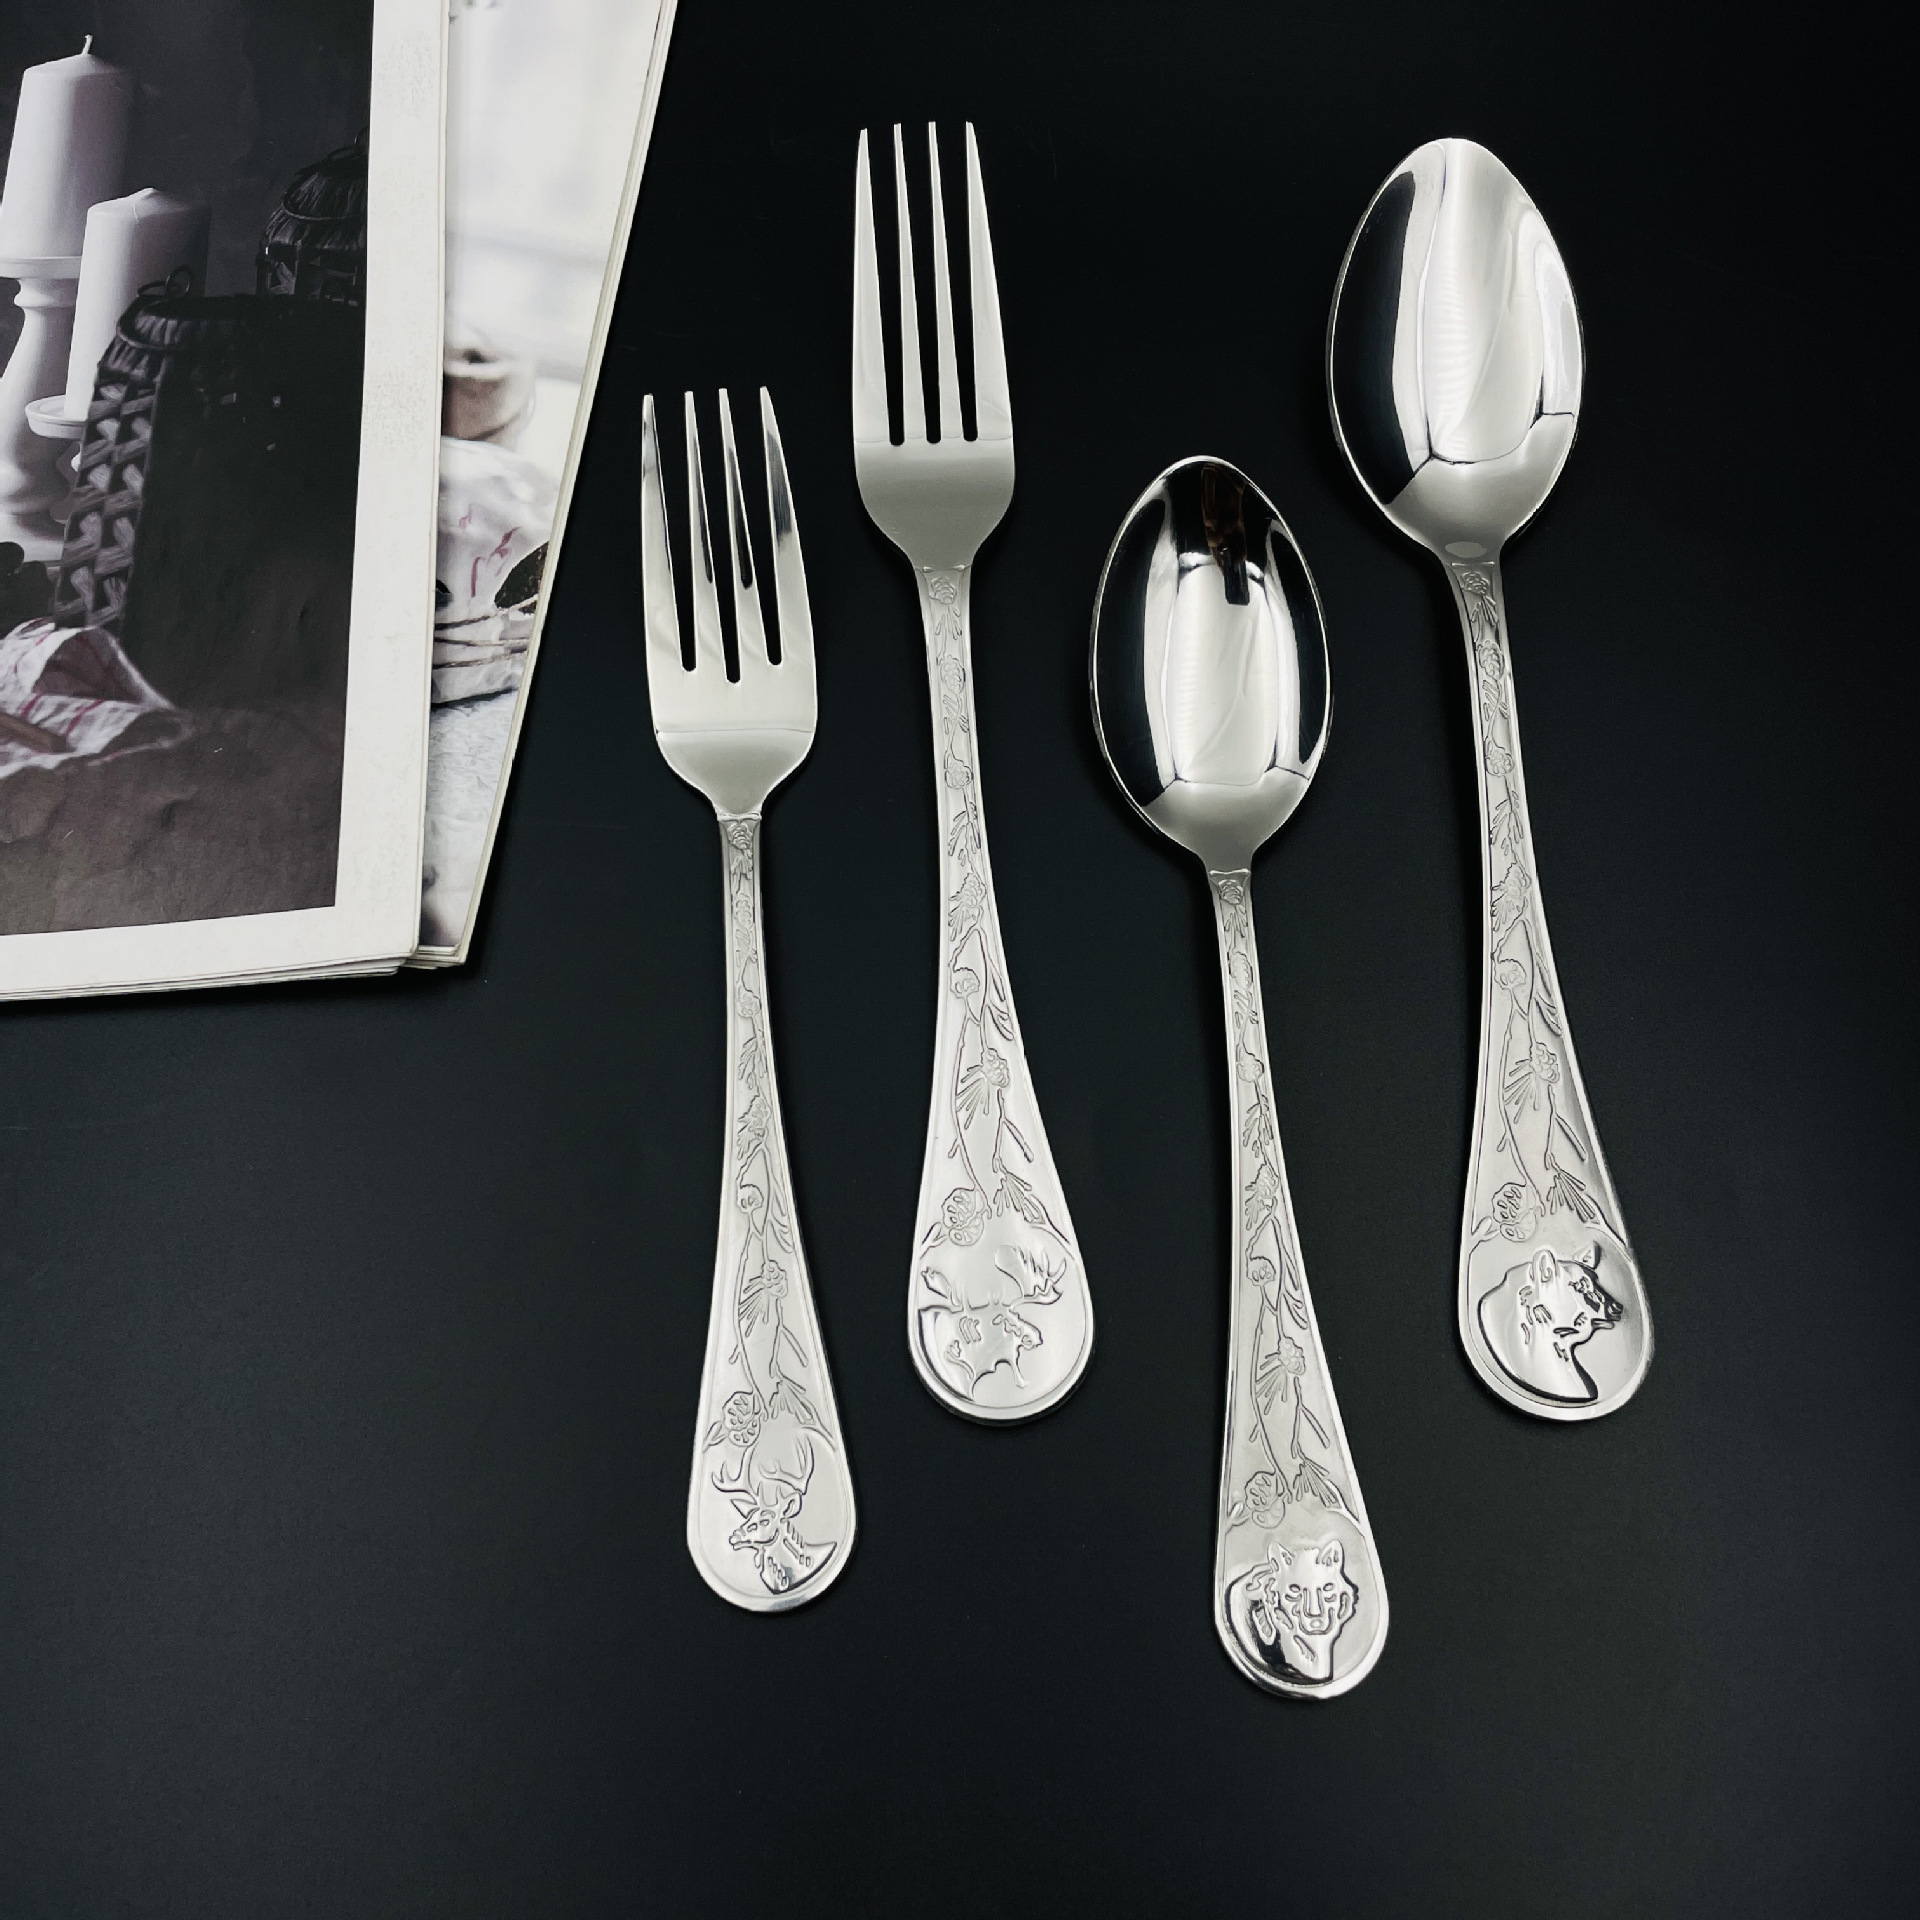 5pcs Spoon Fork Knife Cutlery Heavy Duty Stainless Steel Flatware Set with Animal Fawn Tiger Bear Handle